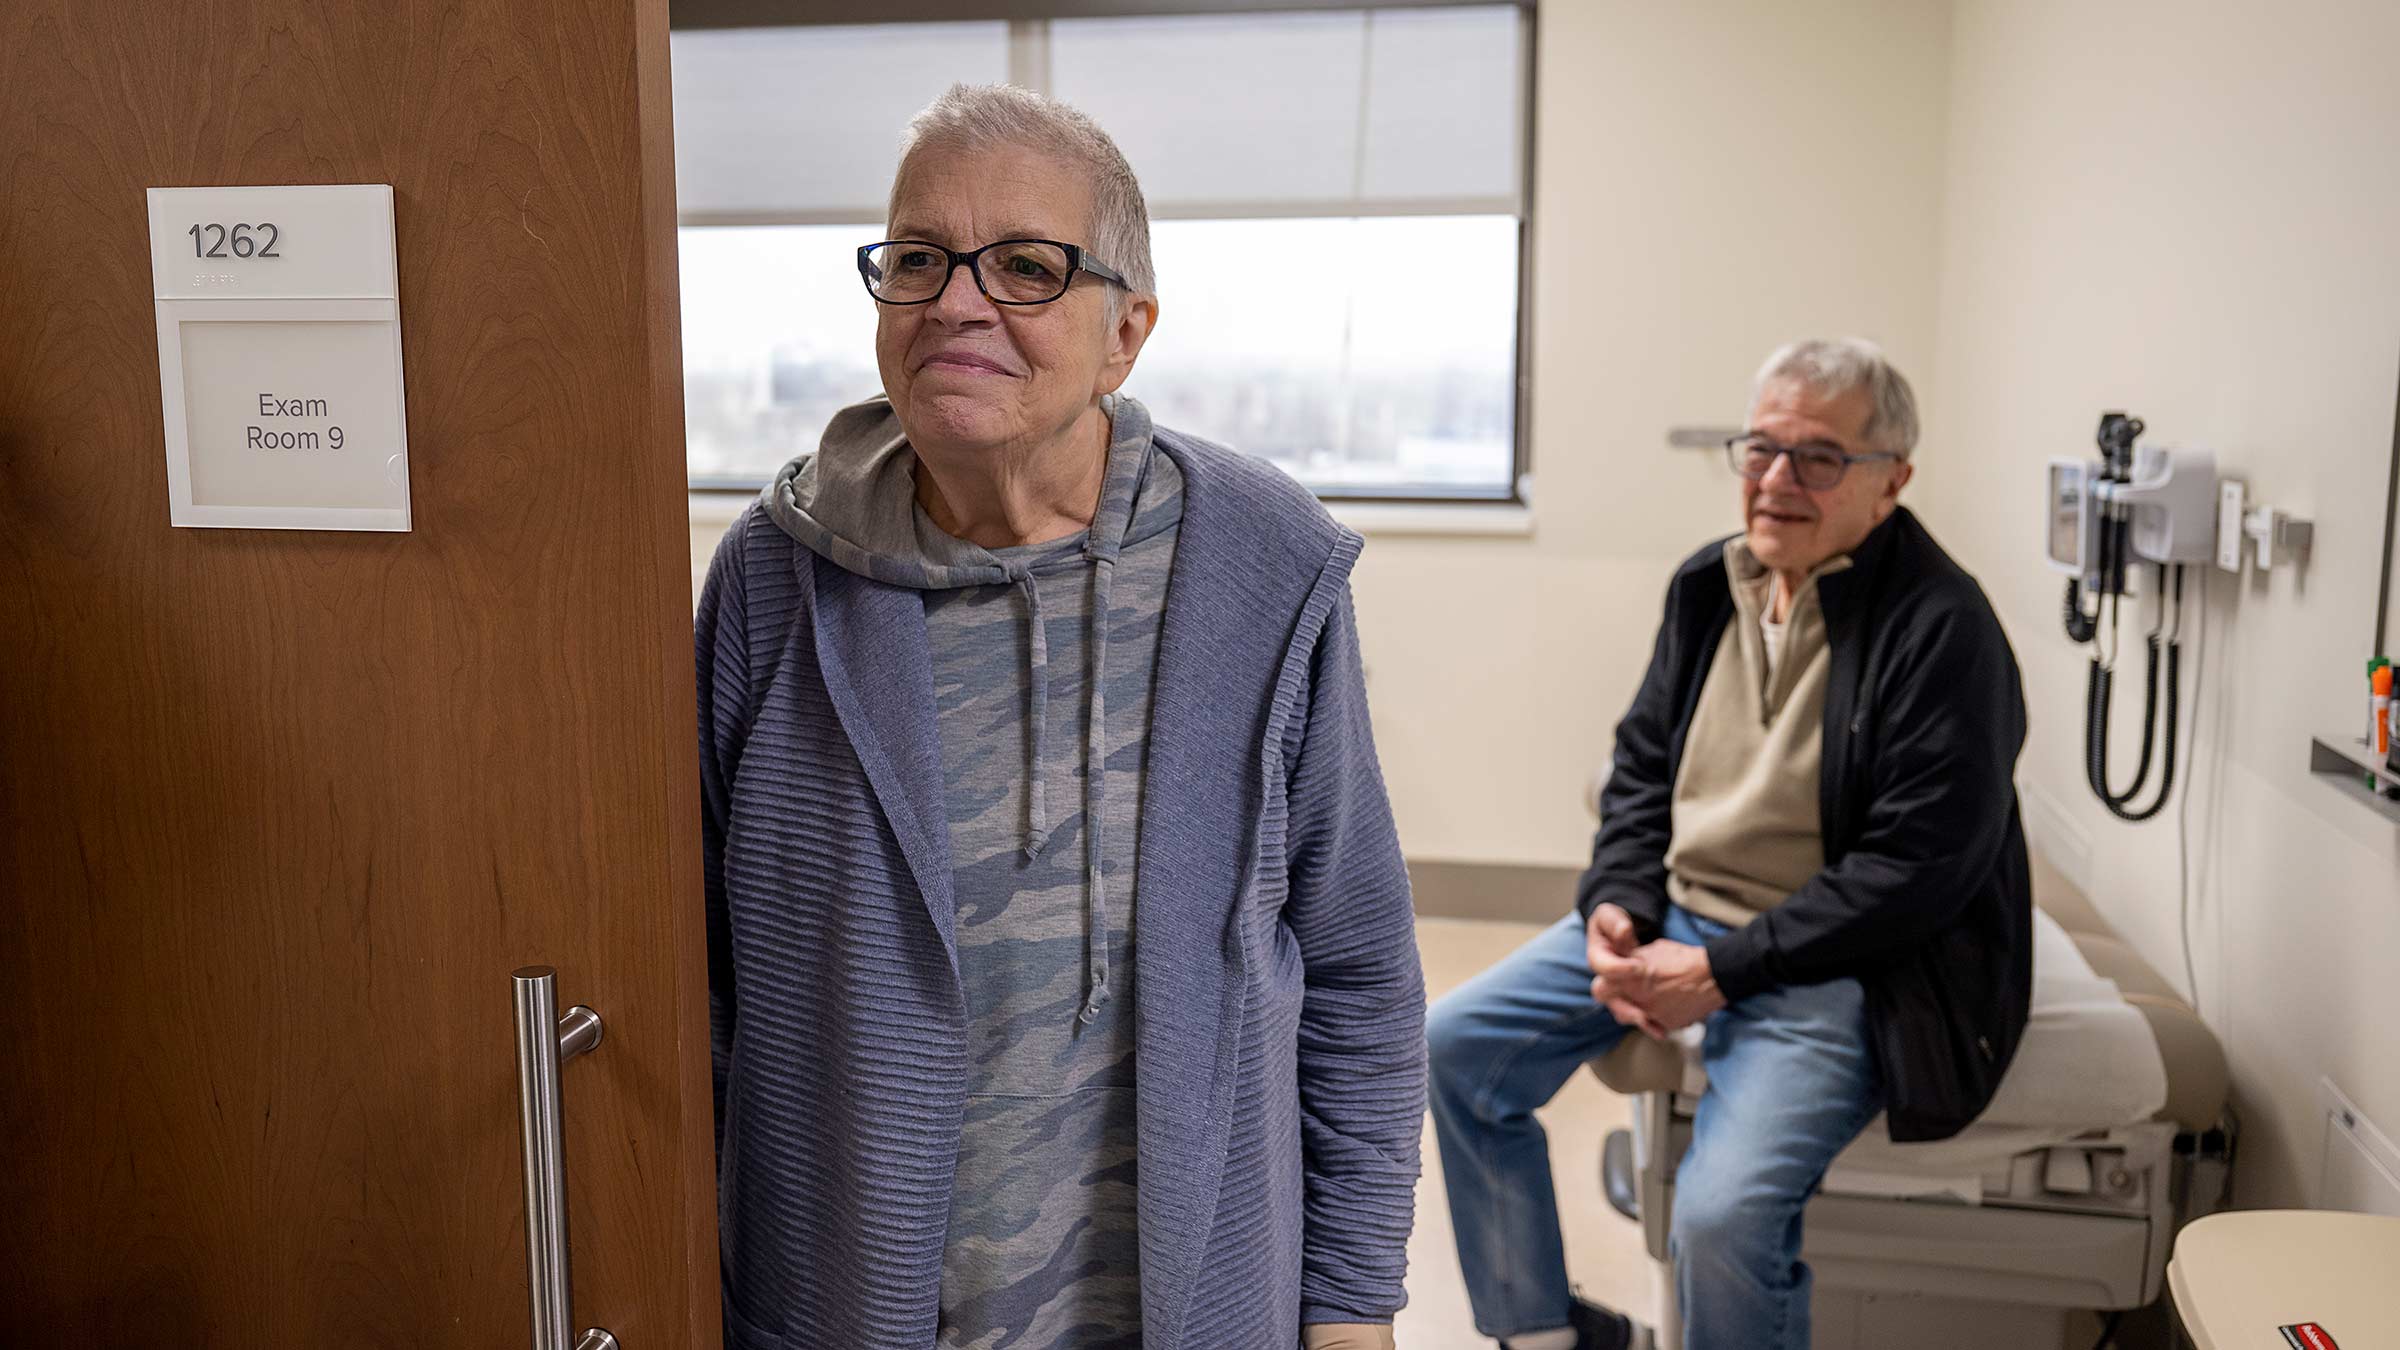 Vicki Rich, a skull reconstruction patient, and her husband wait in an exam room during a post-operative visit